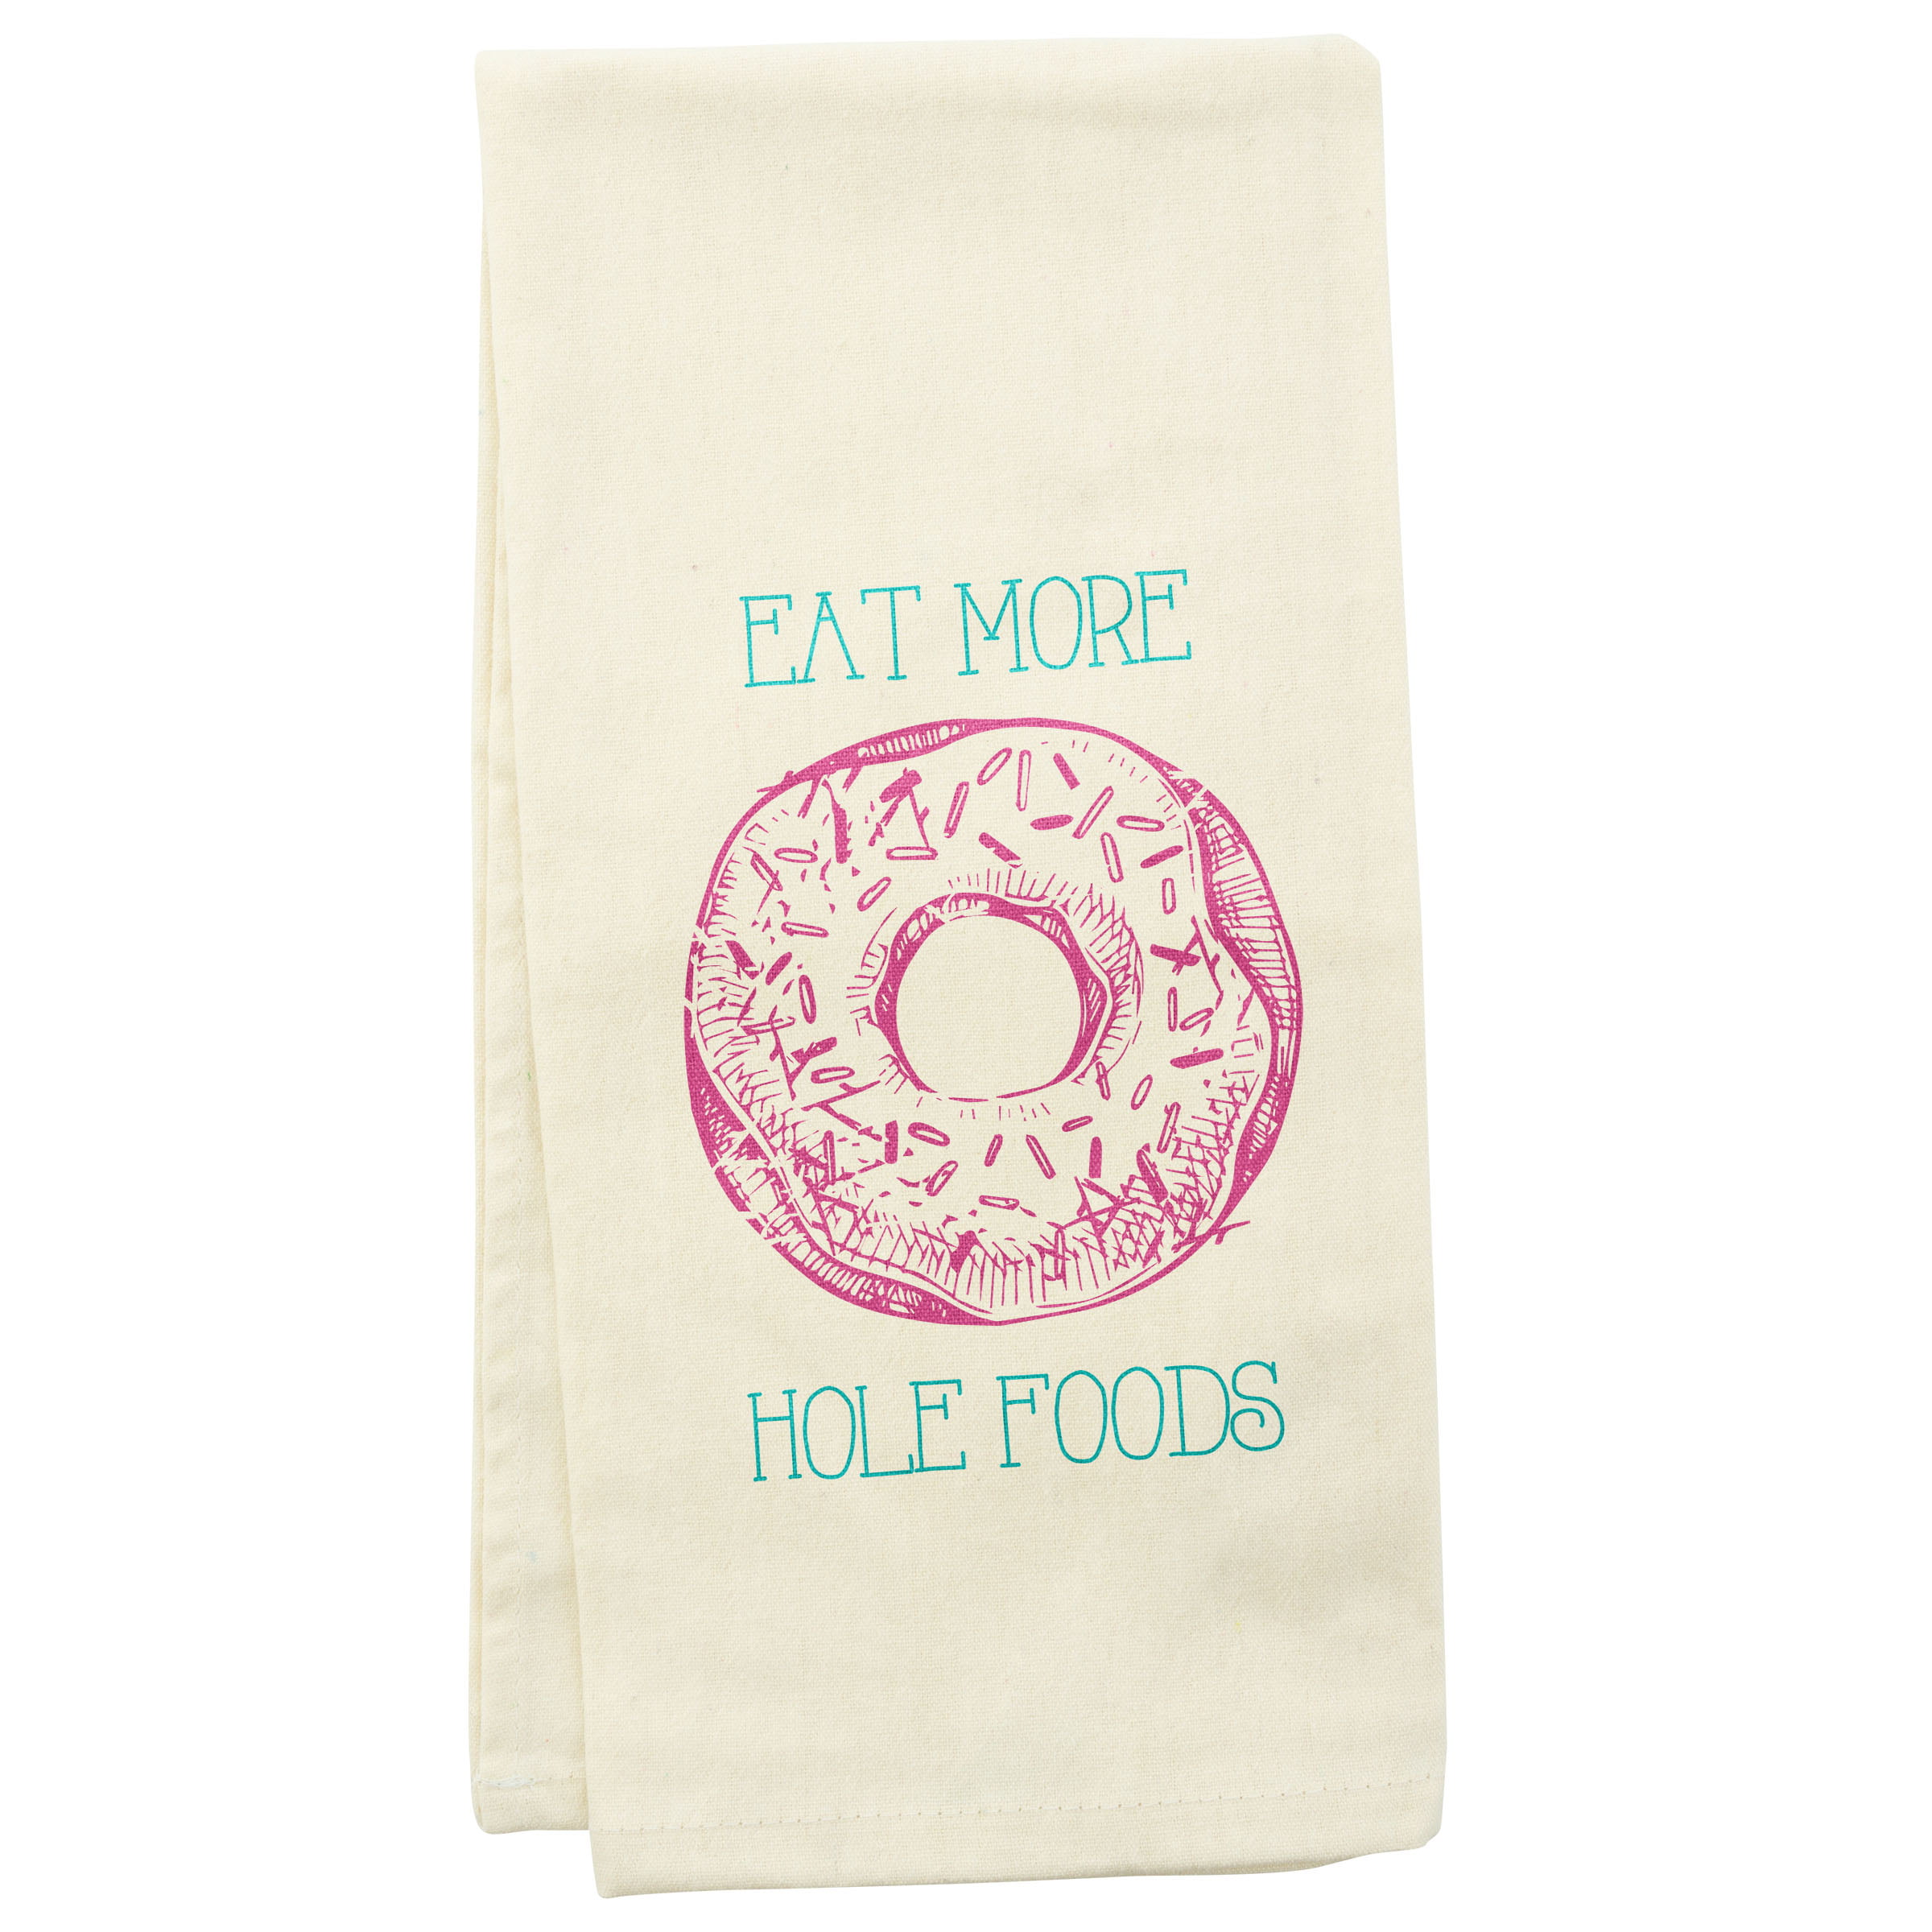 100% Cotton White 30"x30" Dish Towel Funny Eat More Cakes